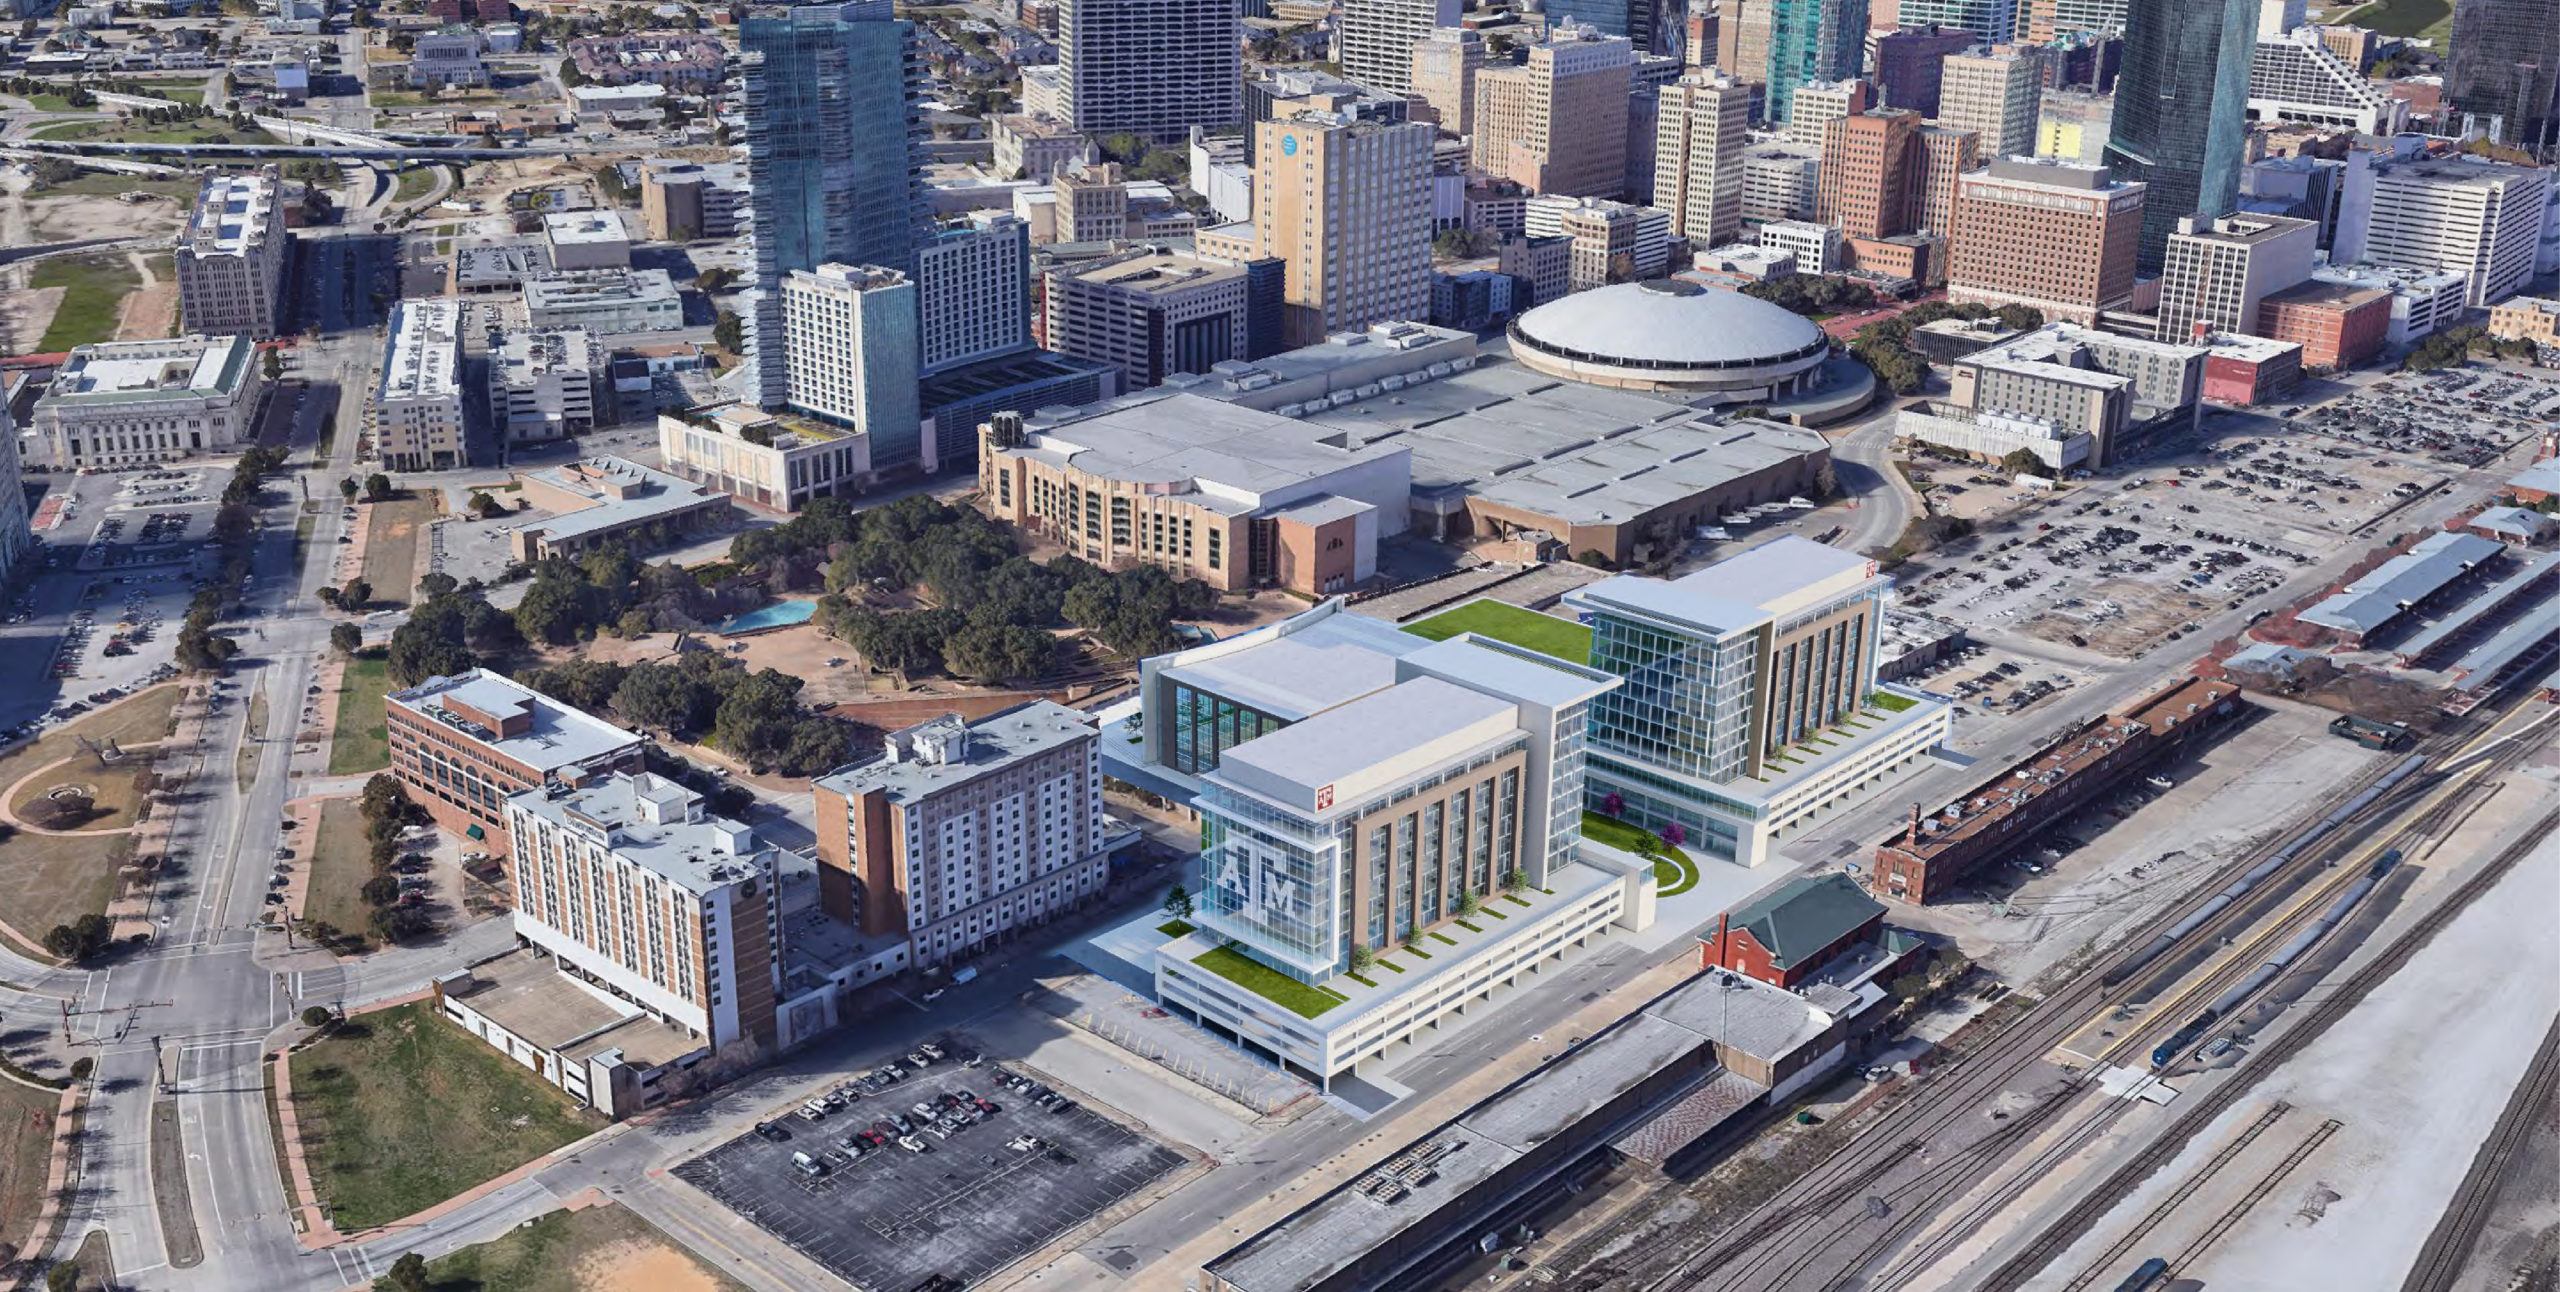 New Texas A&M System Center Eyed For Downtown Fort Worth Texas A&M Today